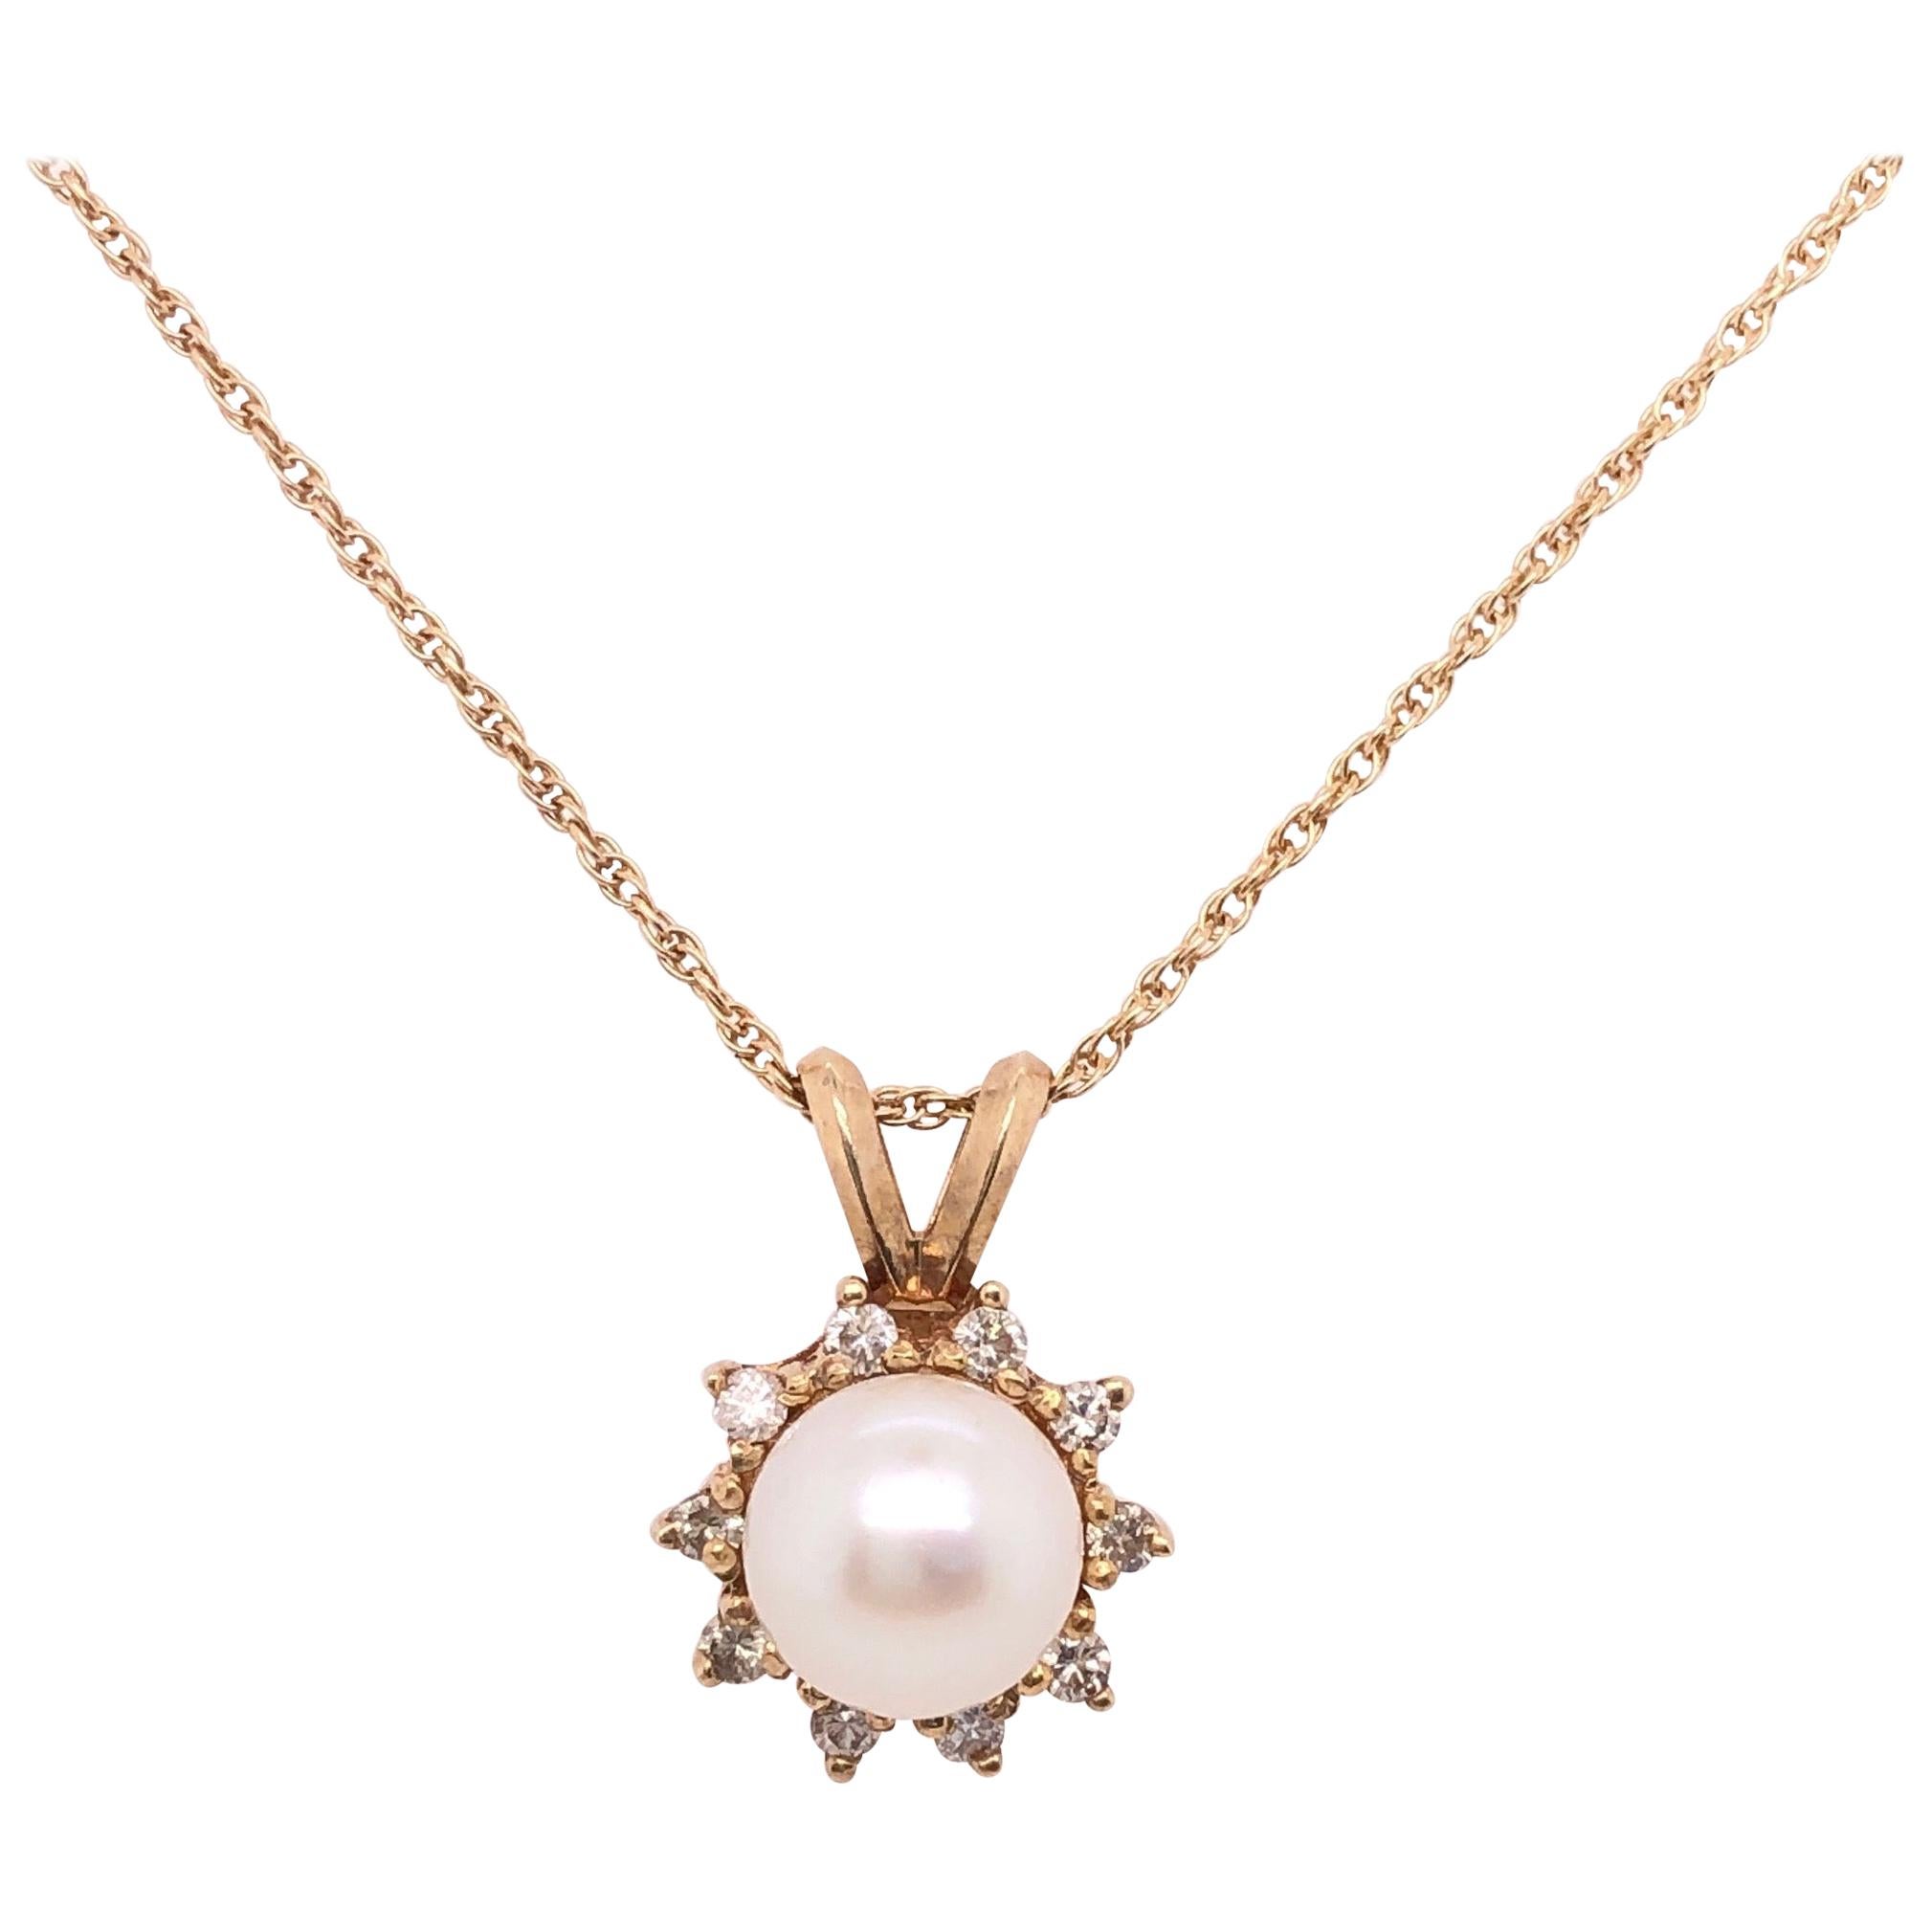 14 Karat Yellow Gold Necklace with Cultured Pearl and Diamond Pendant